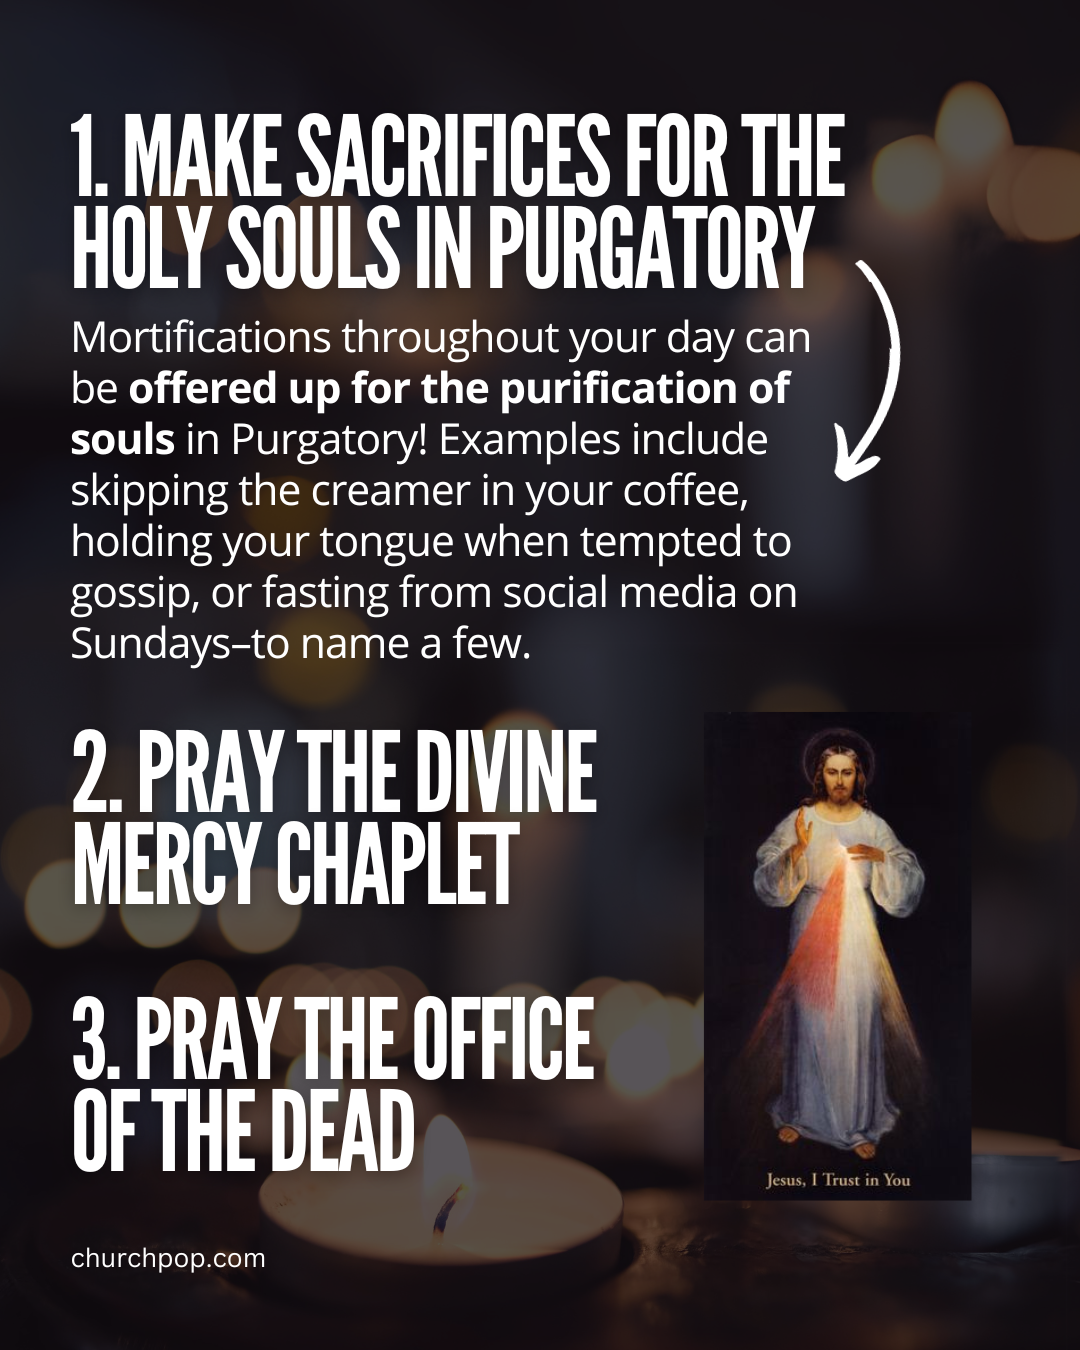 purgatory, sacrifice, divine mercy chaplet, how to pray the office of the dead